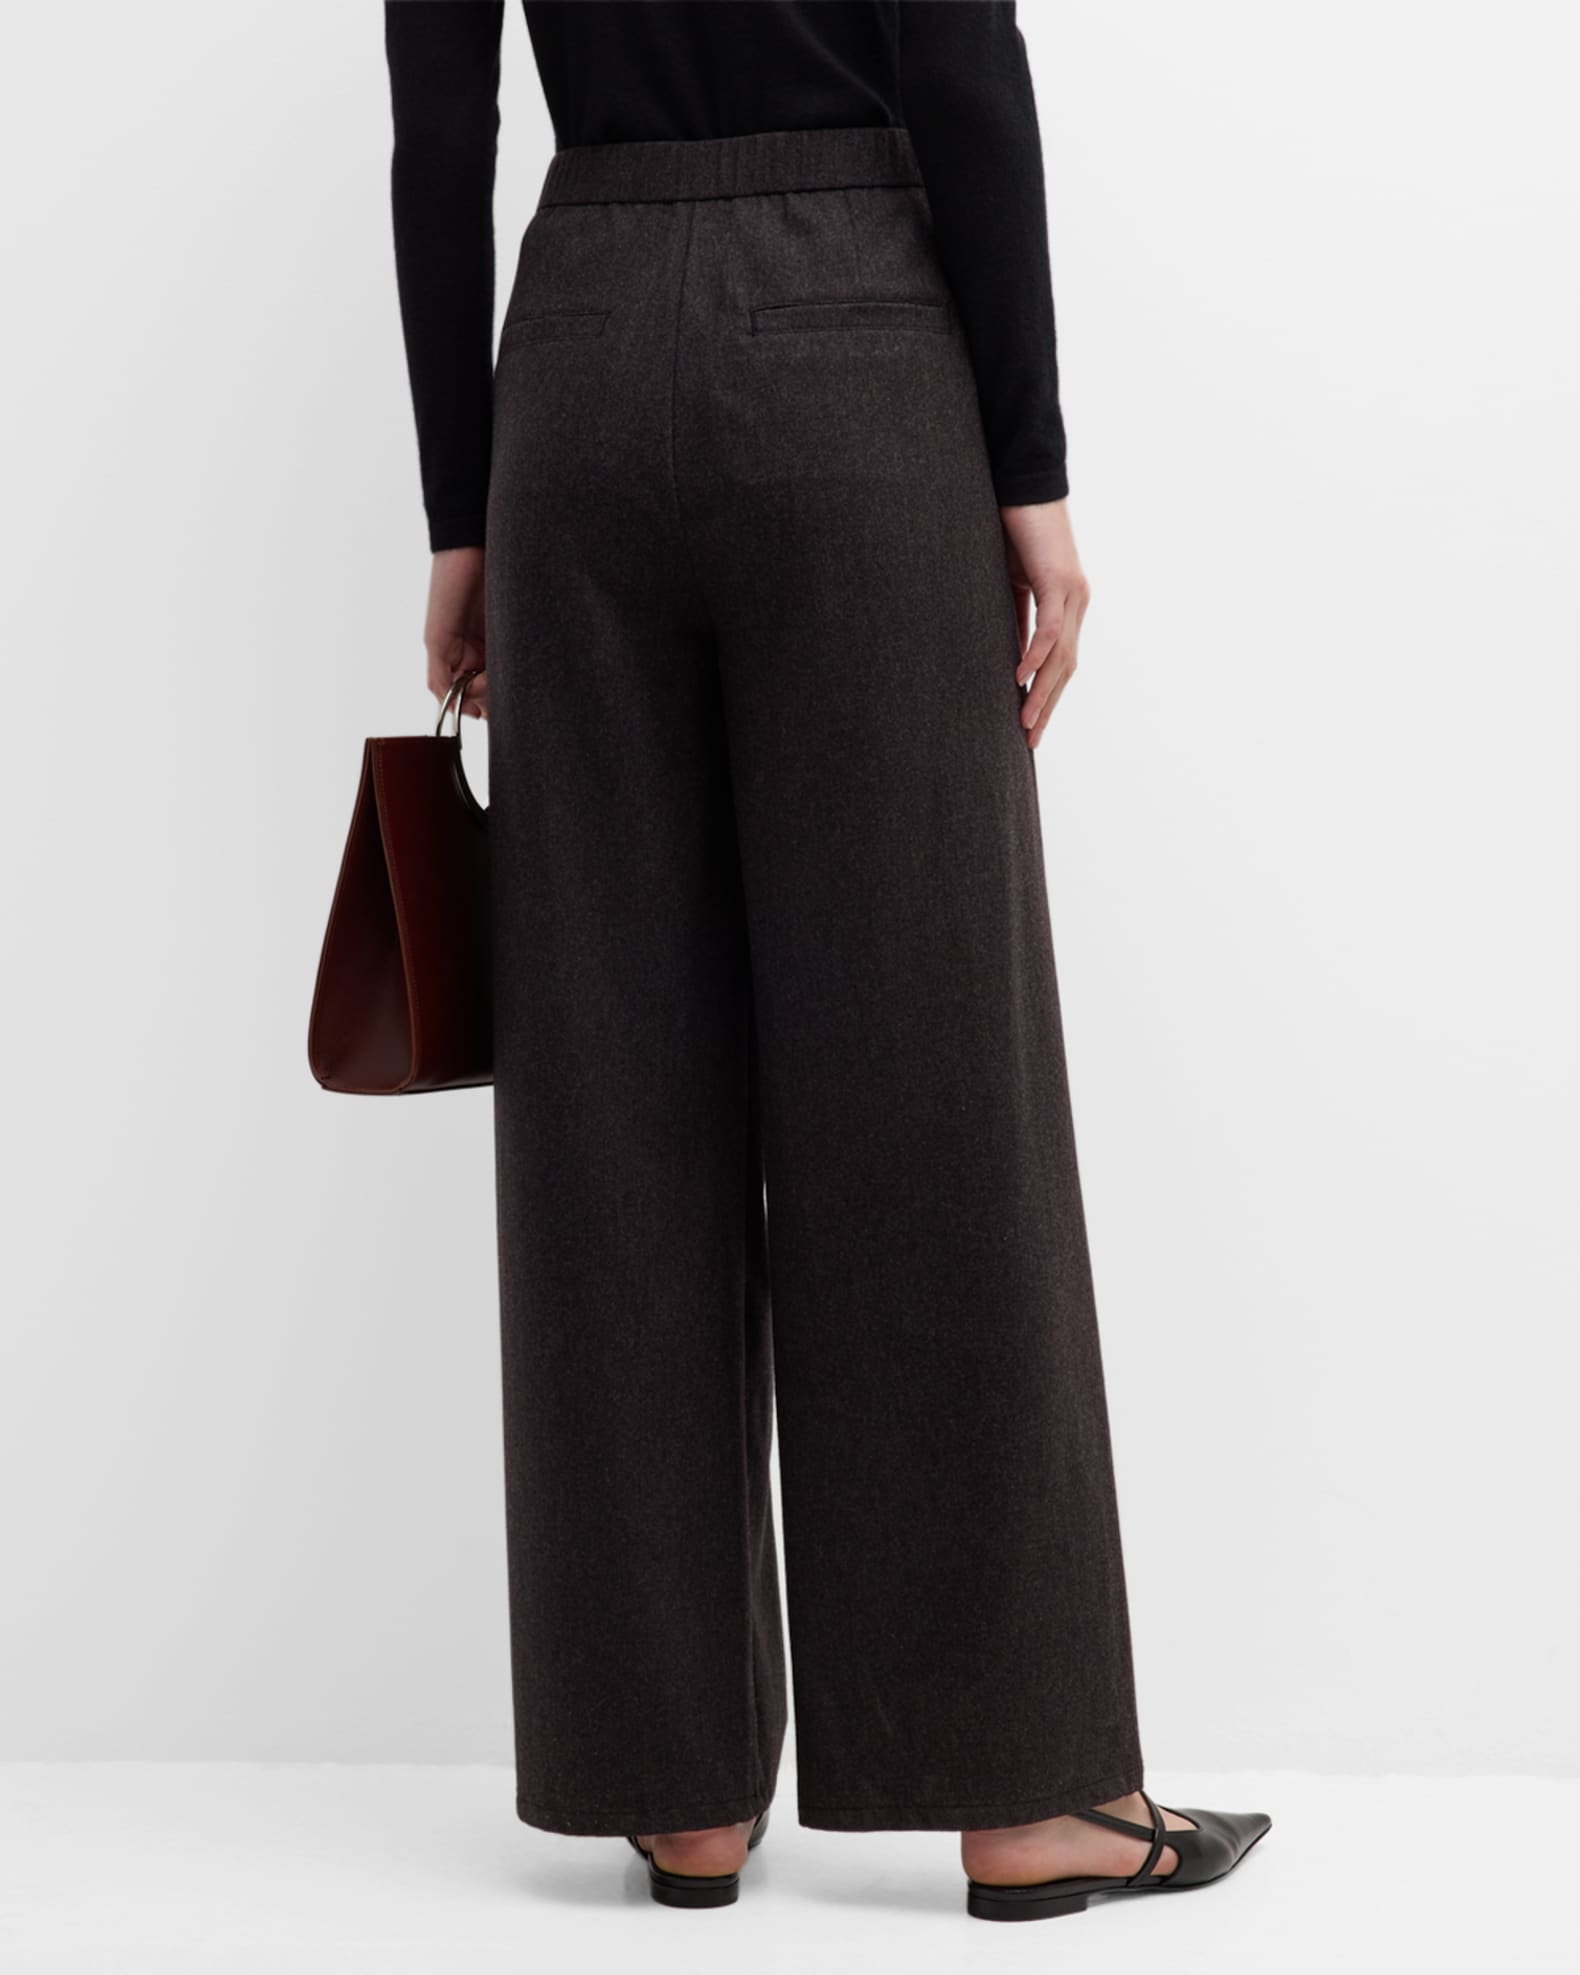 Eileen Fisher Missy Flannel Tapered Ankle Pants | Neiman Marcus